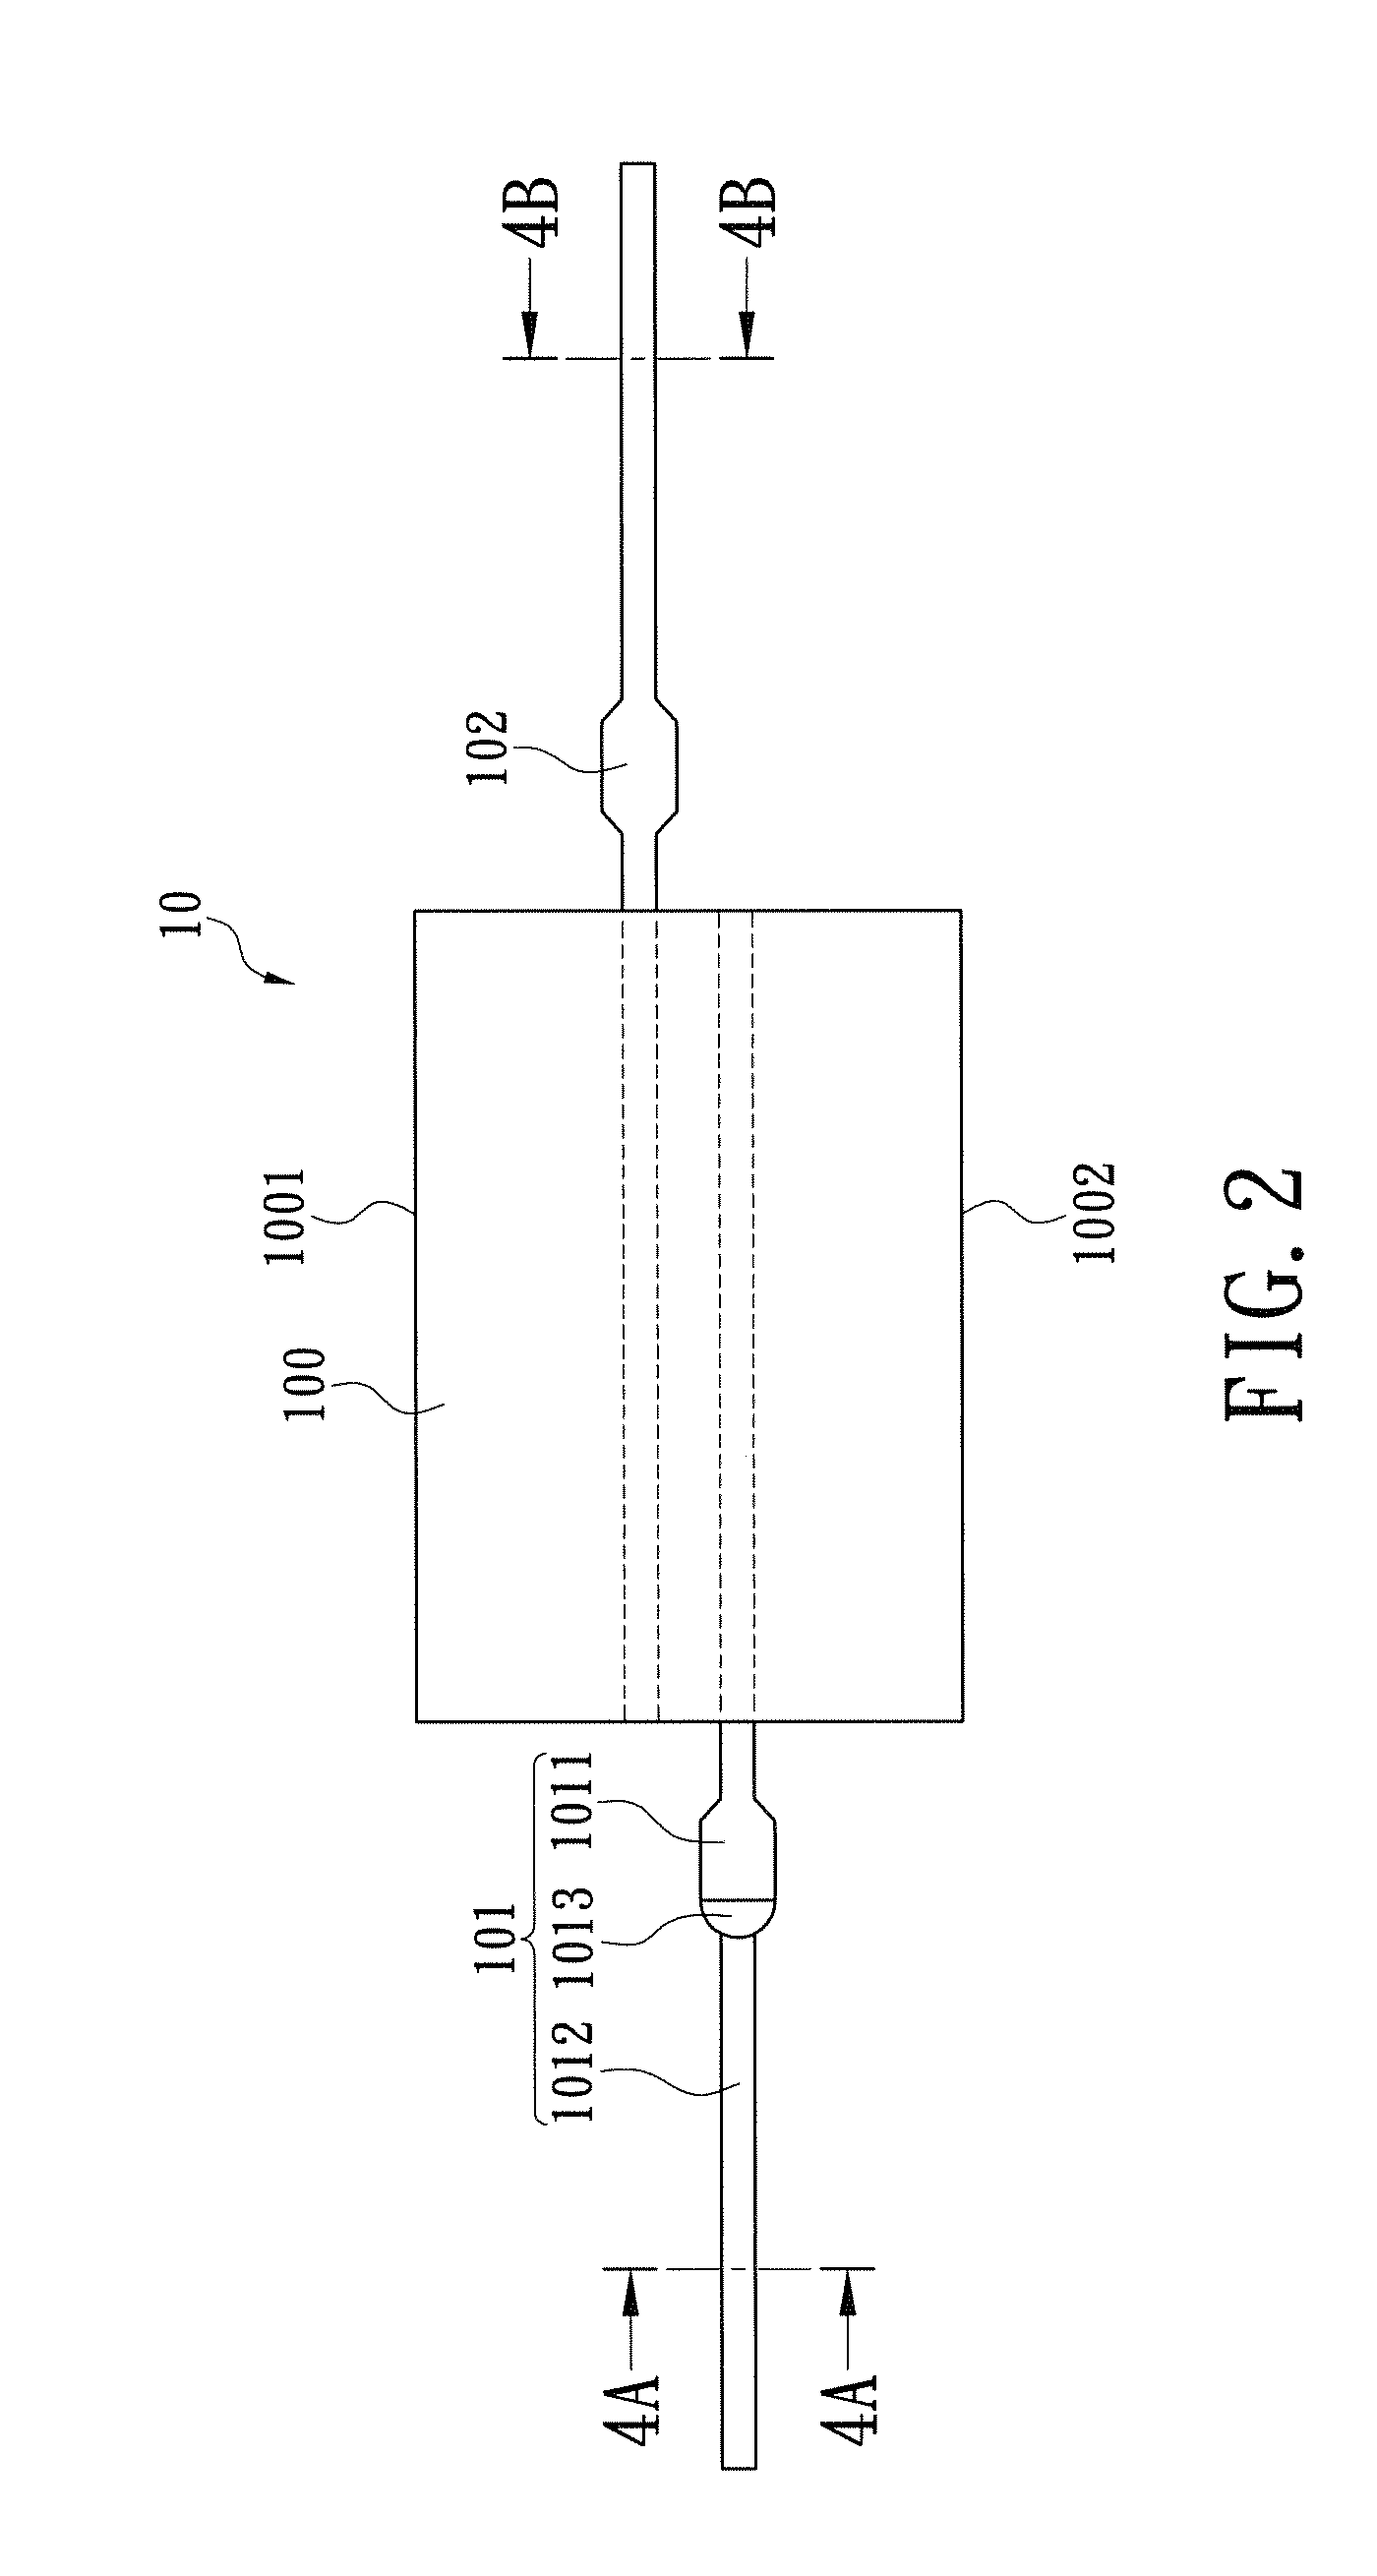 Winding-type solid electrolytic capacitor package structure without using a lead frame and method of manufacturing the same